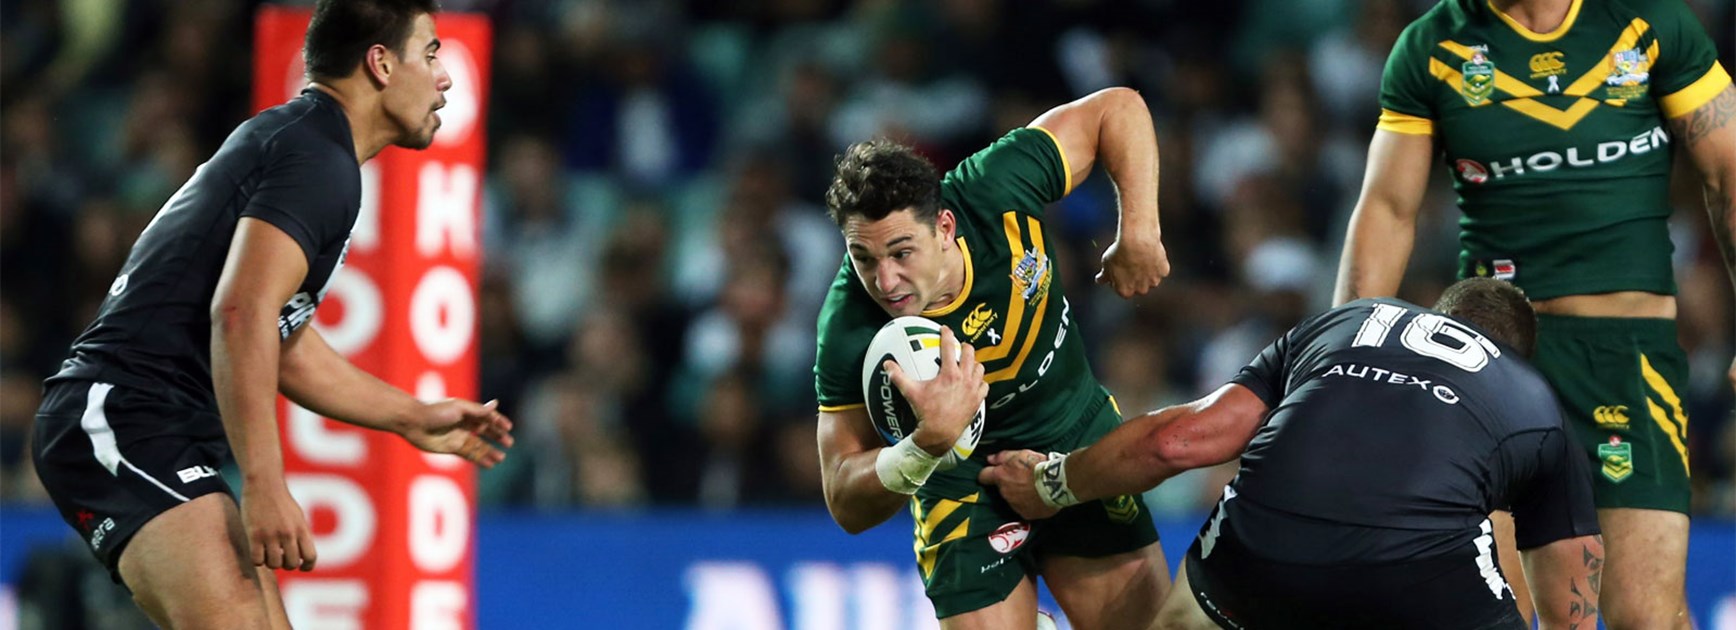 Billy Slater in action for Australia in last year's representative round Test against New Zealand.